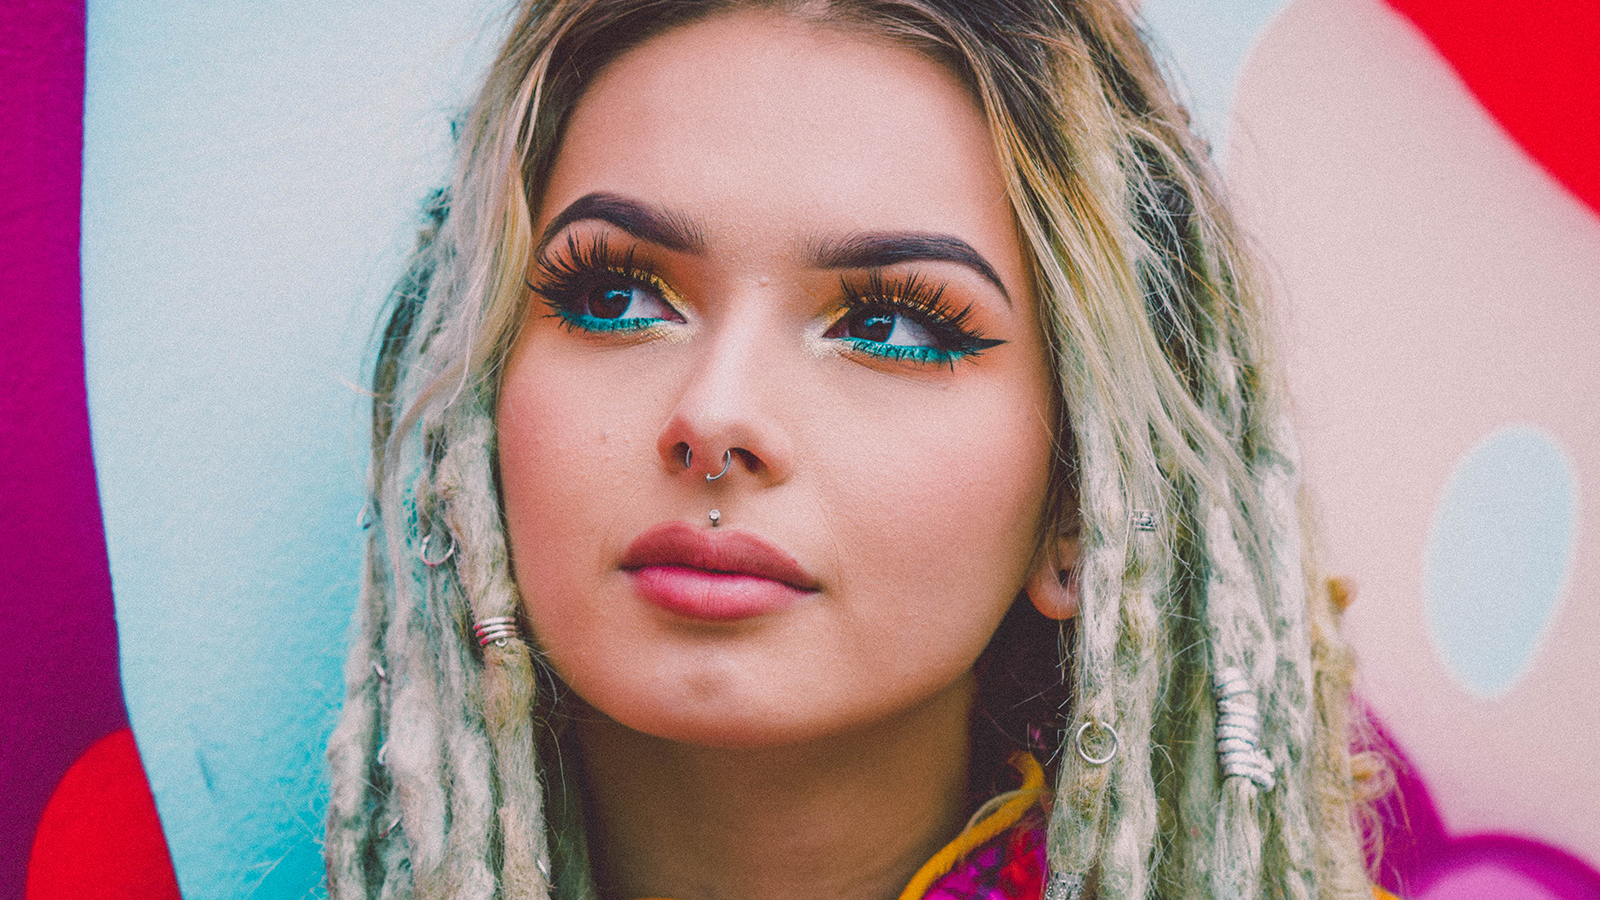 Zhavia signed to Columbia Records and collabed with French Montana.